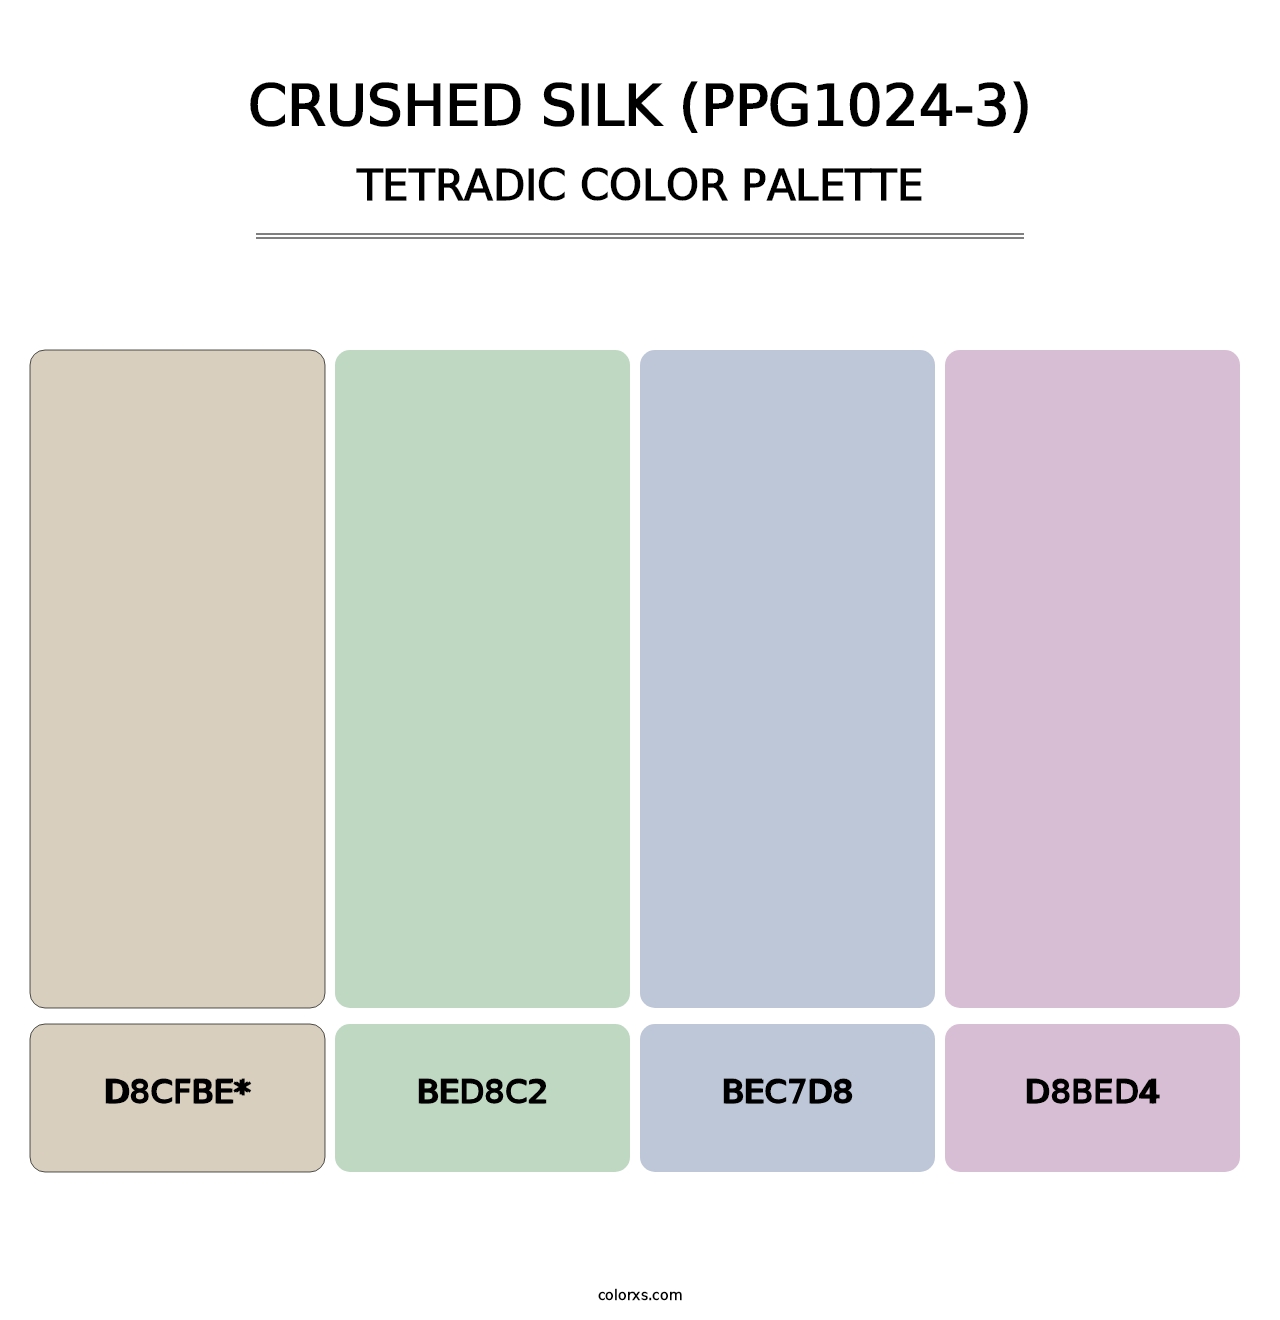 Crushed Silk (PPG1024-3) - Tetradic Color Palette